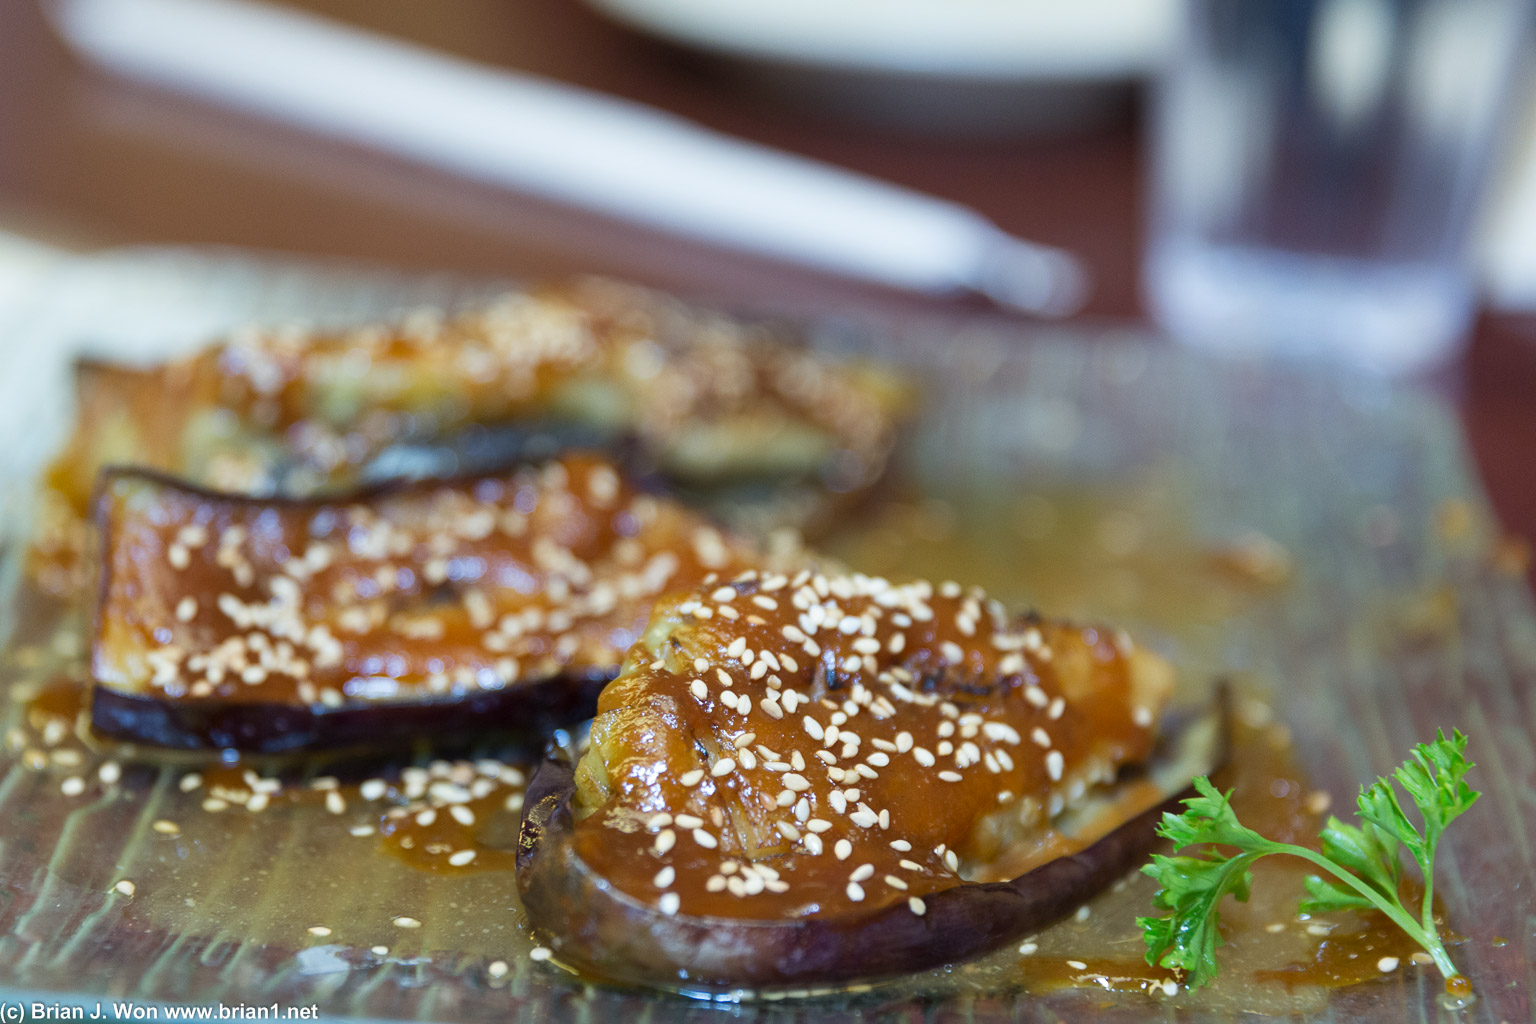 Eggplant. Pretty good, although a bit overcooked.